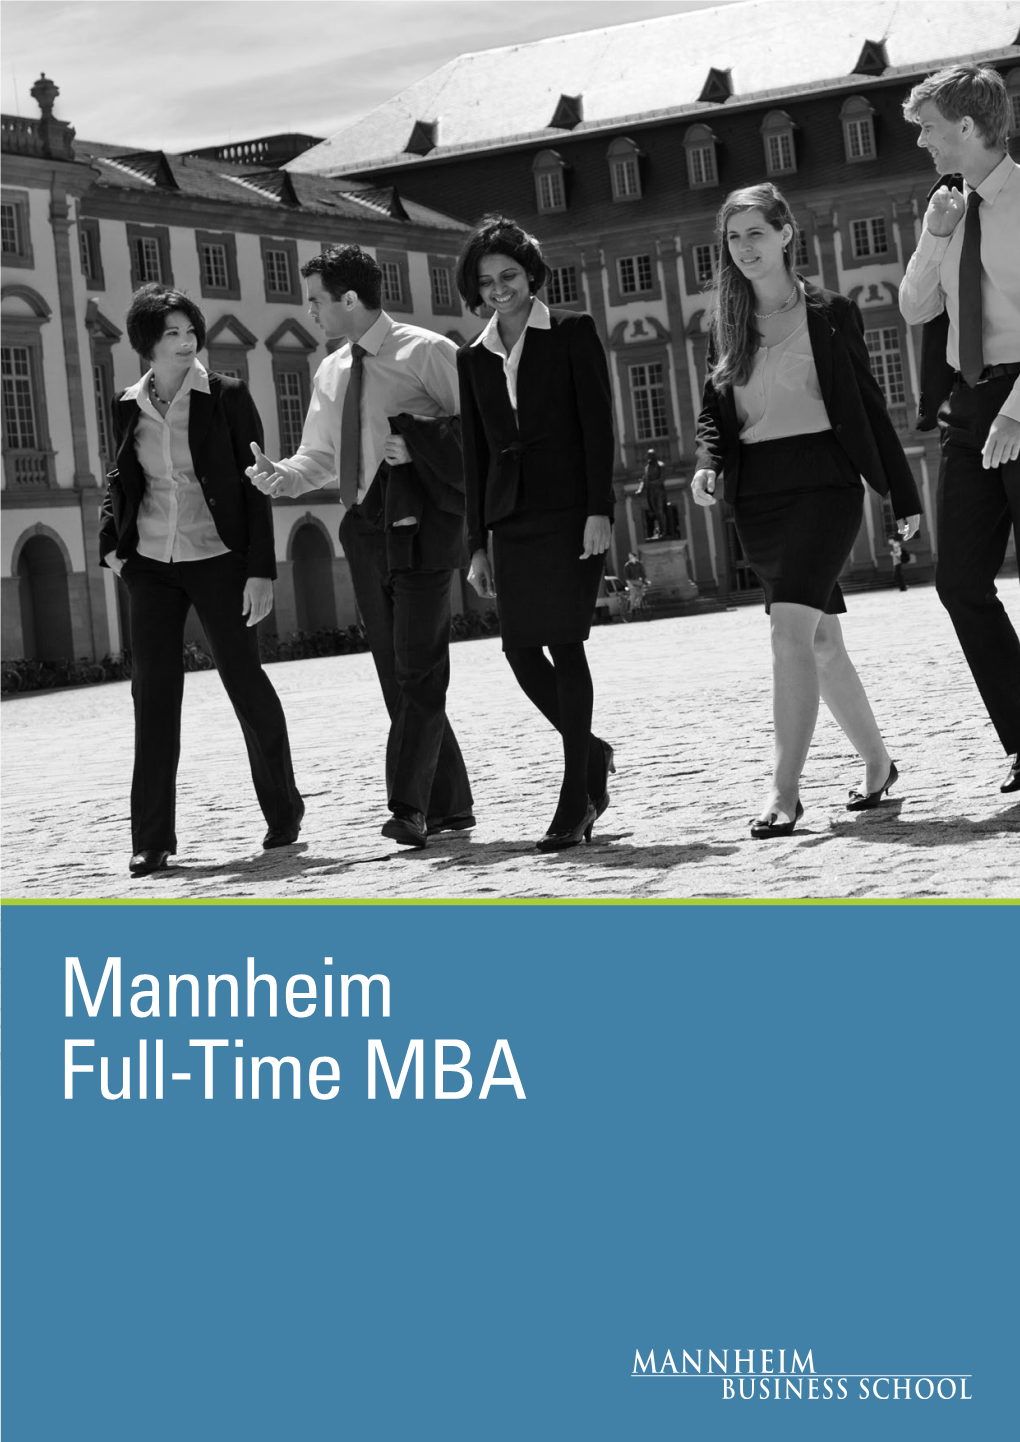 Mannheim Full-Time MBA Contents